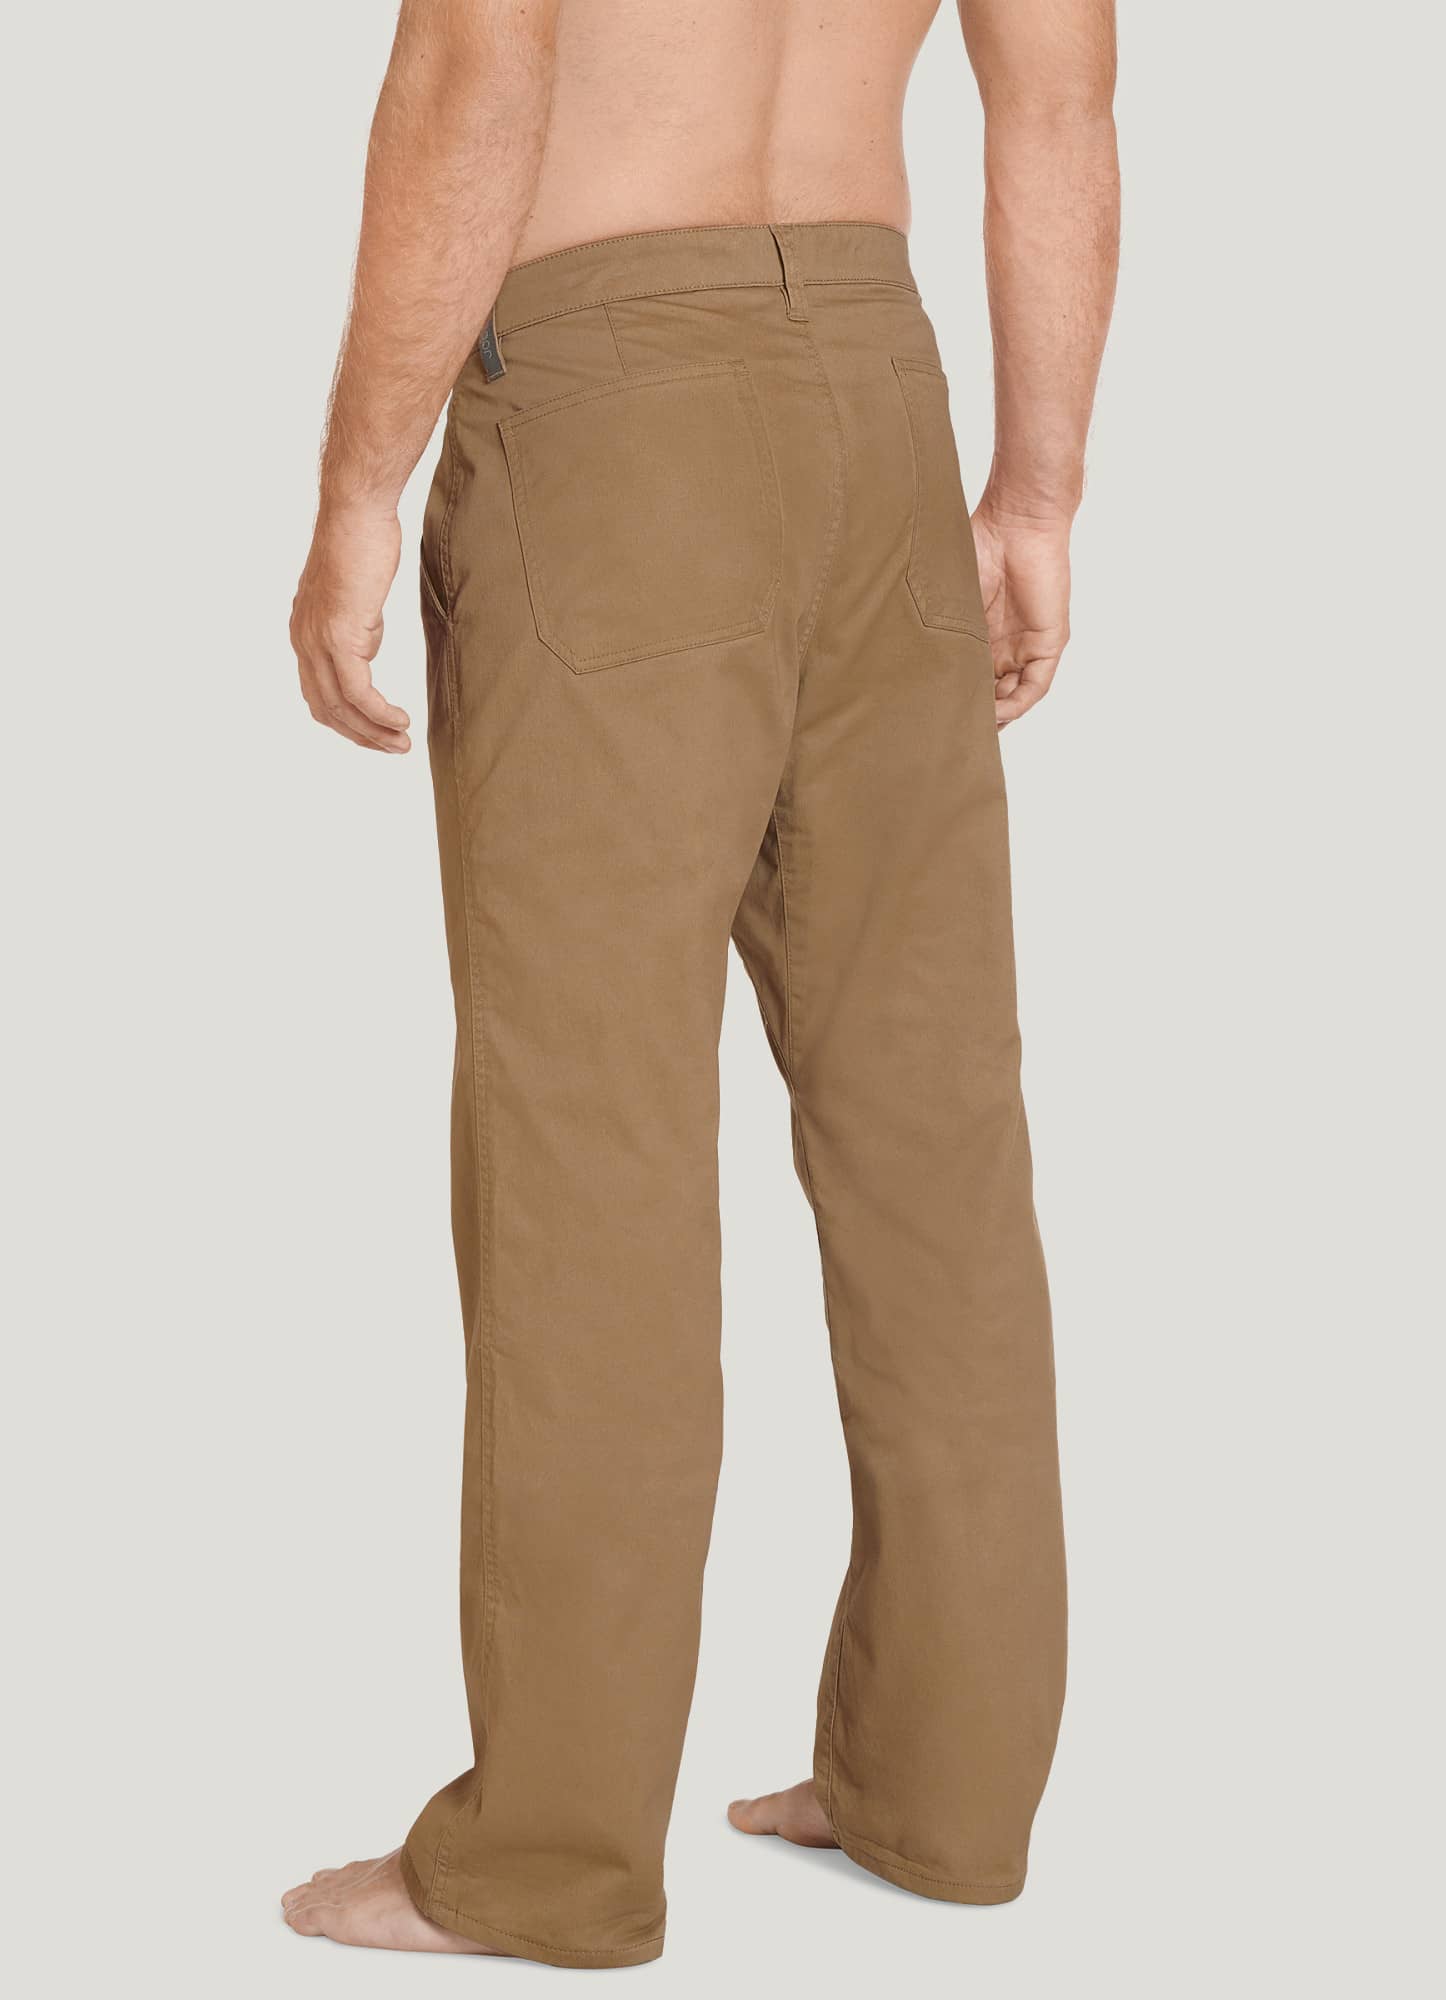 Jockey Outdoors™ Flannel Lined Pant